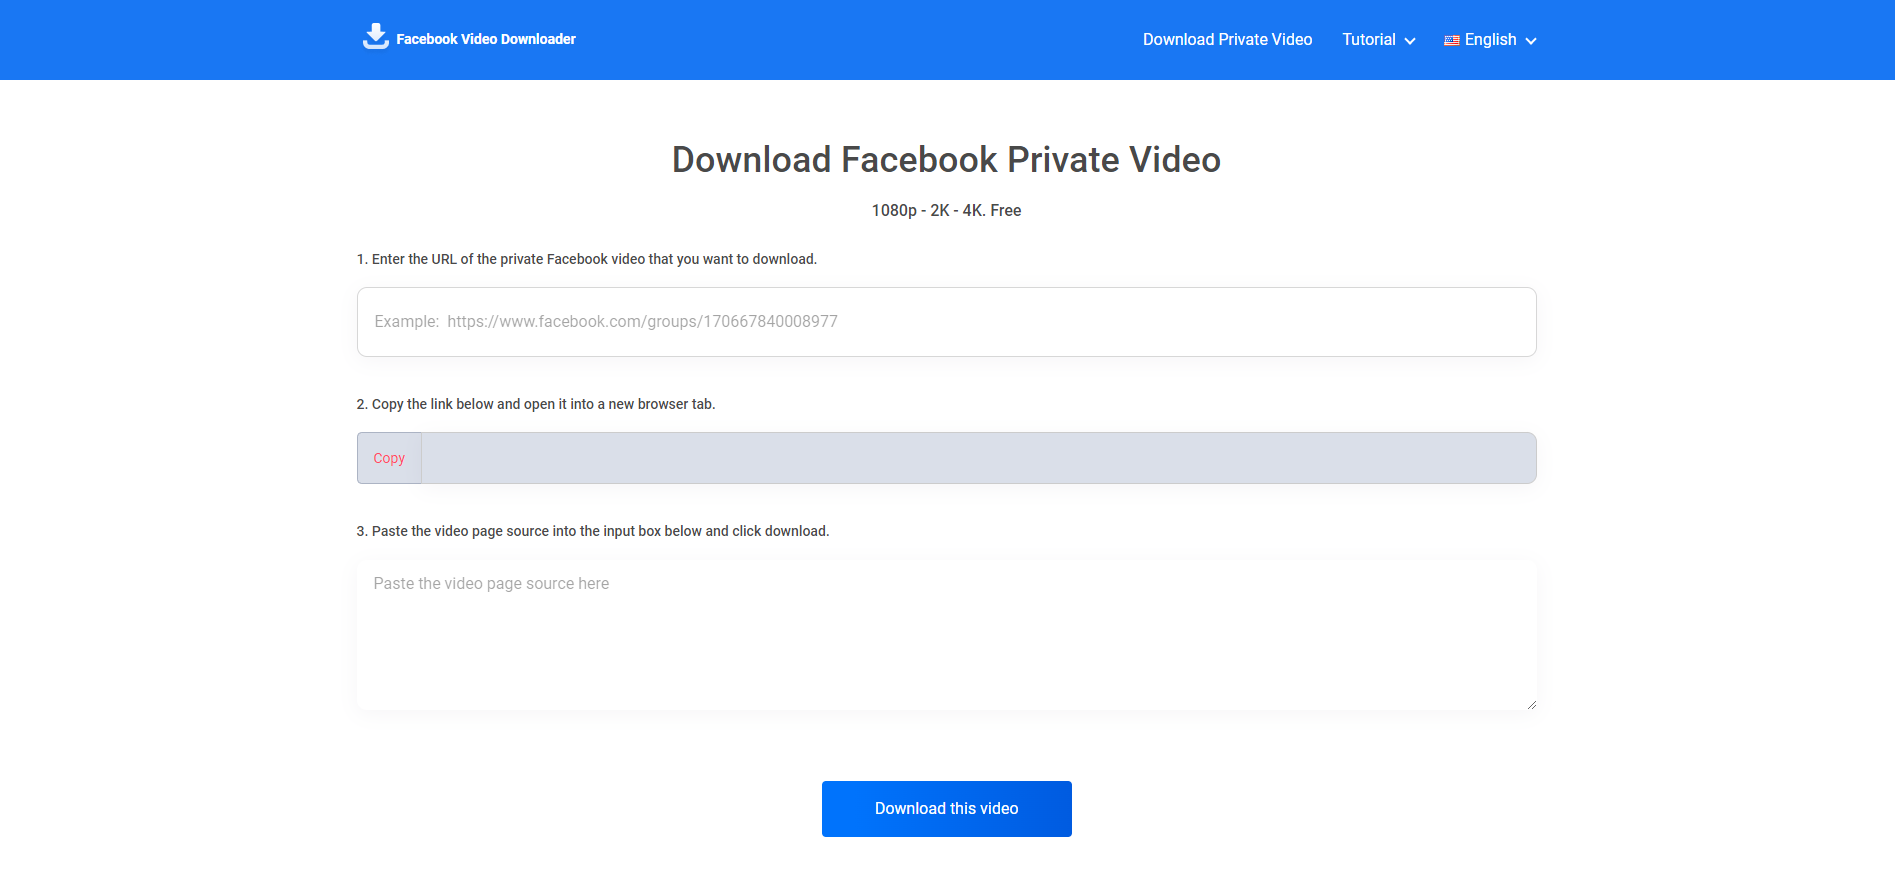 Why Should You Use Our Video Downloader for Facebook: Download Private Videos?